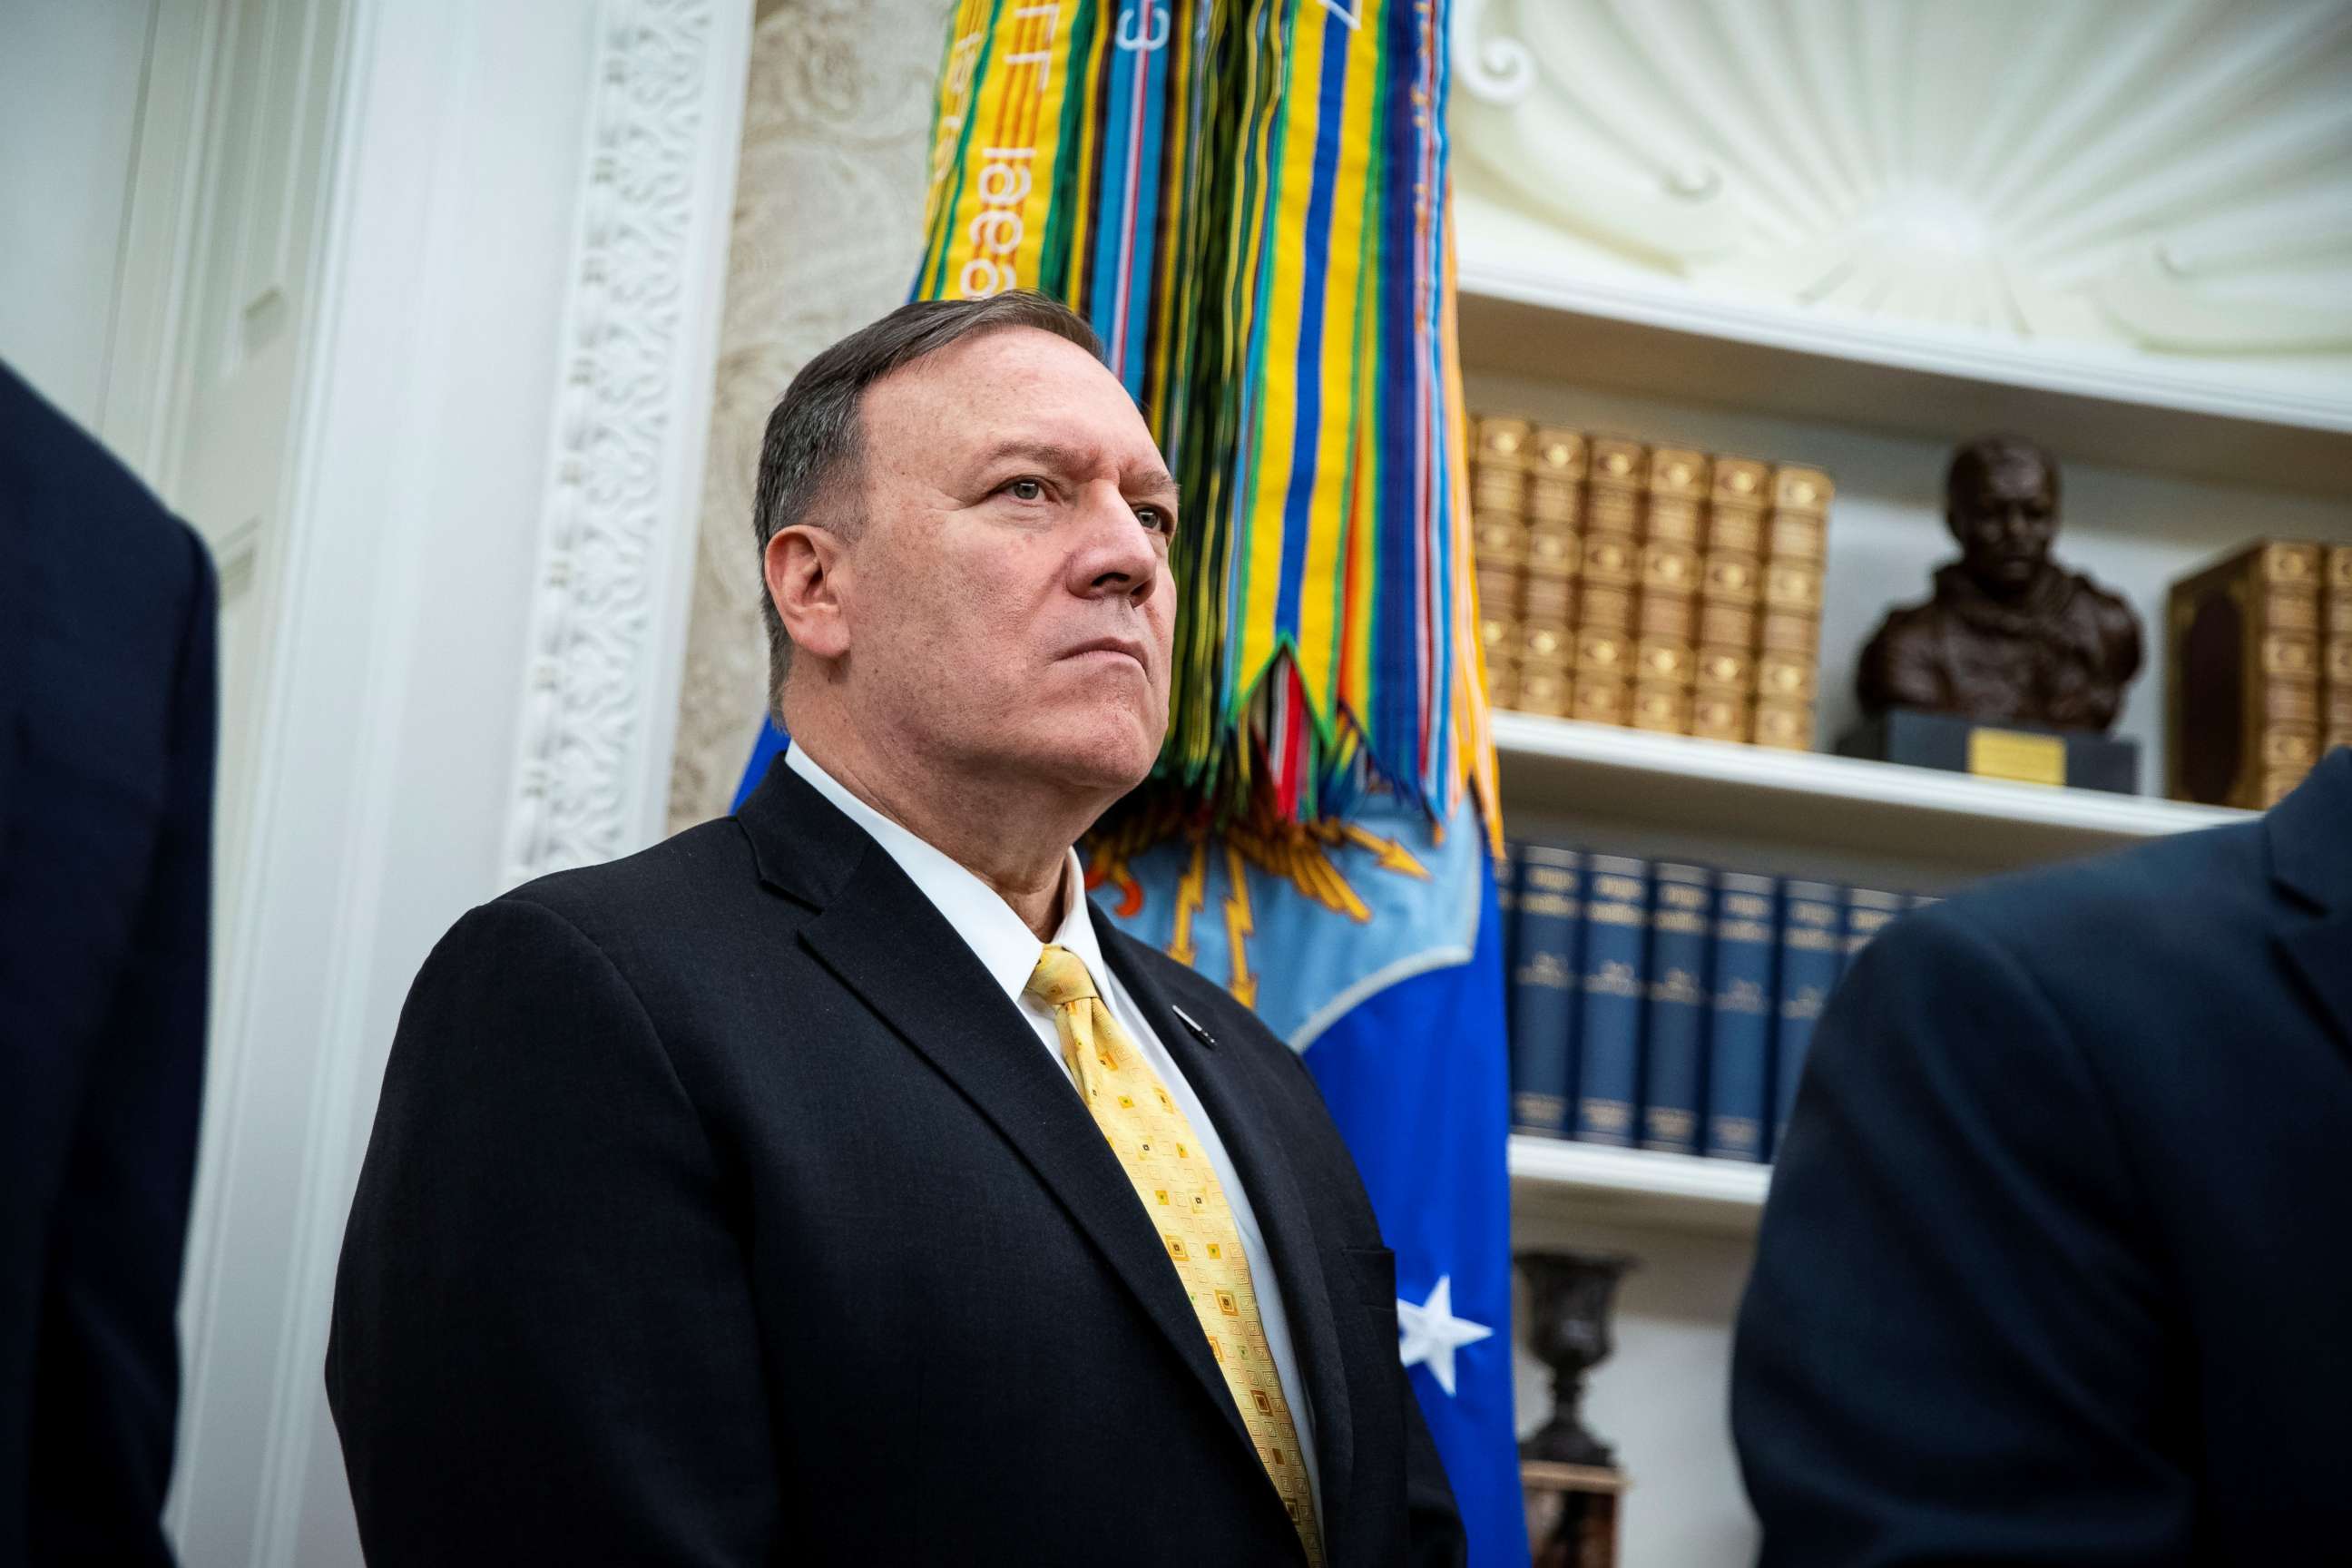 PHOTO: Secretary of State Mike Pompeo listens as President Donald Trump meets with Bahrain Crown Prince Salman bin Hamad Al Khalifa during a meeting in the Oval Office of the White House, Sept. 16, 2019.